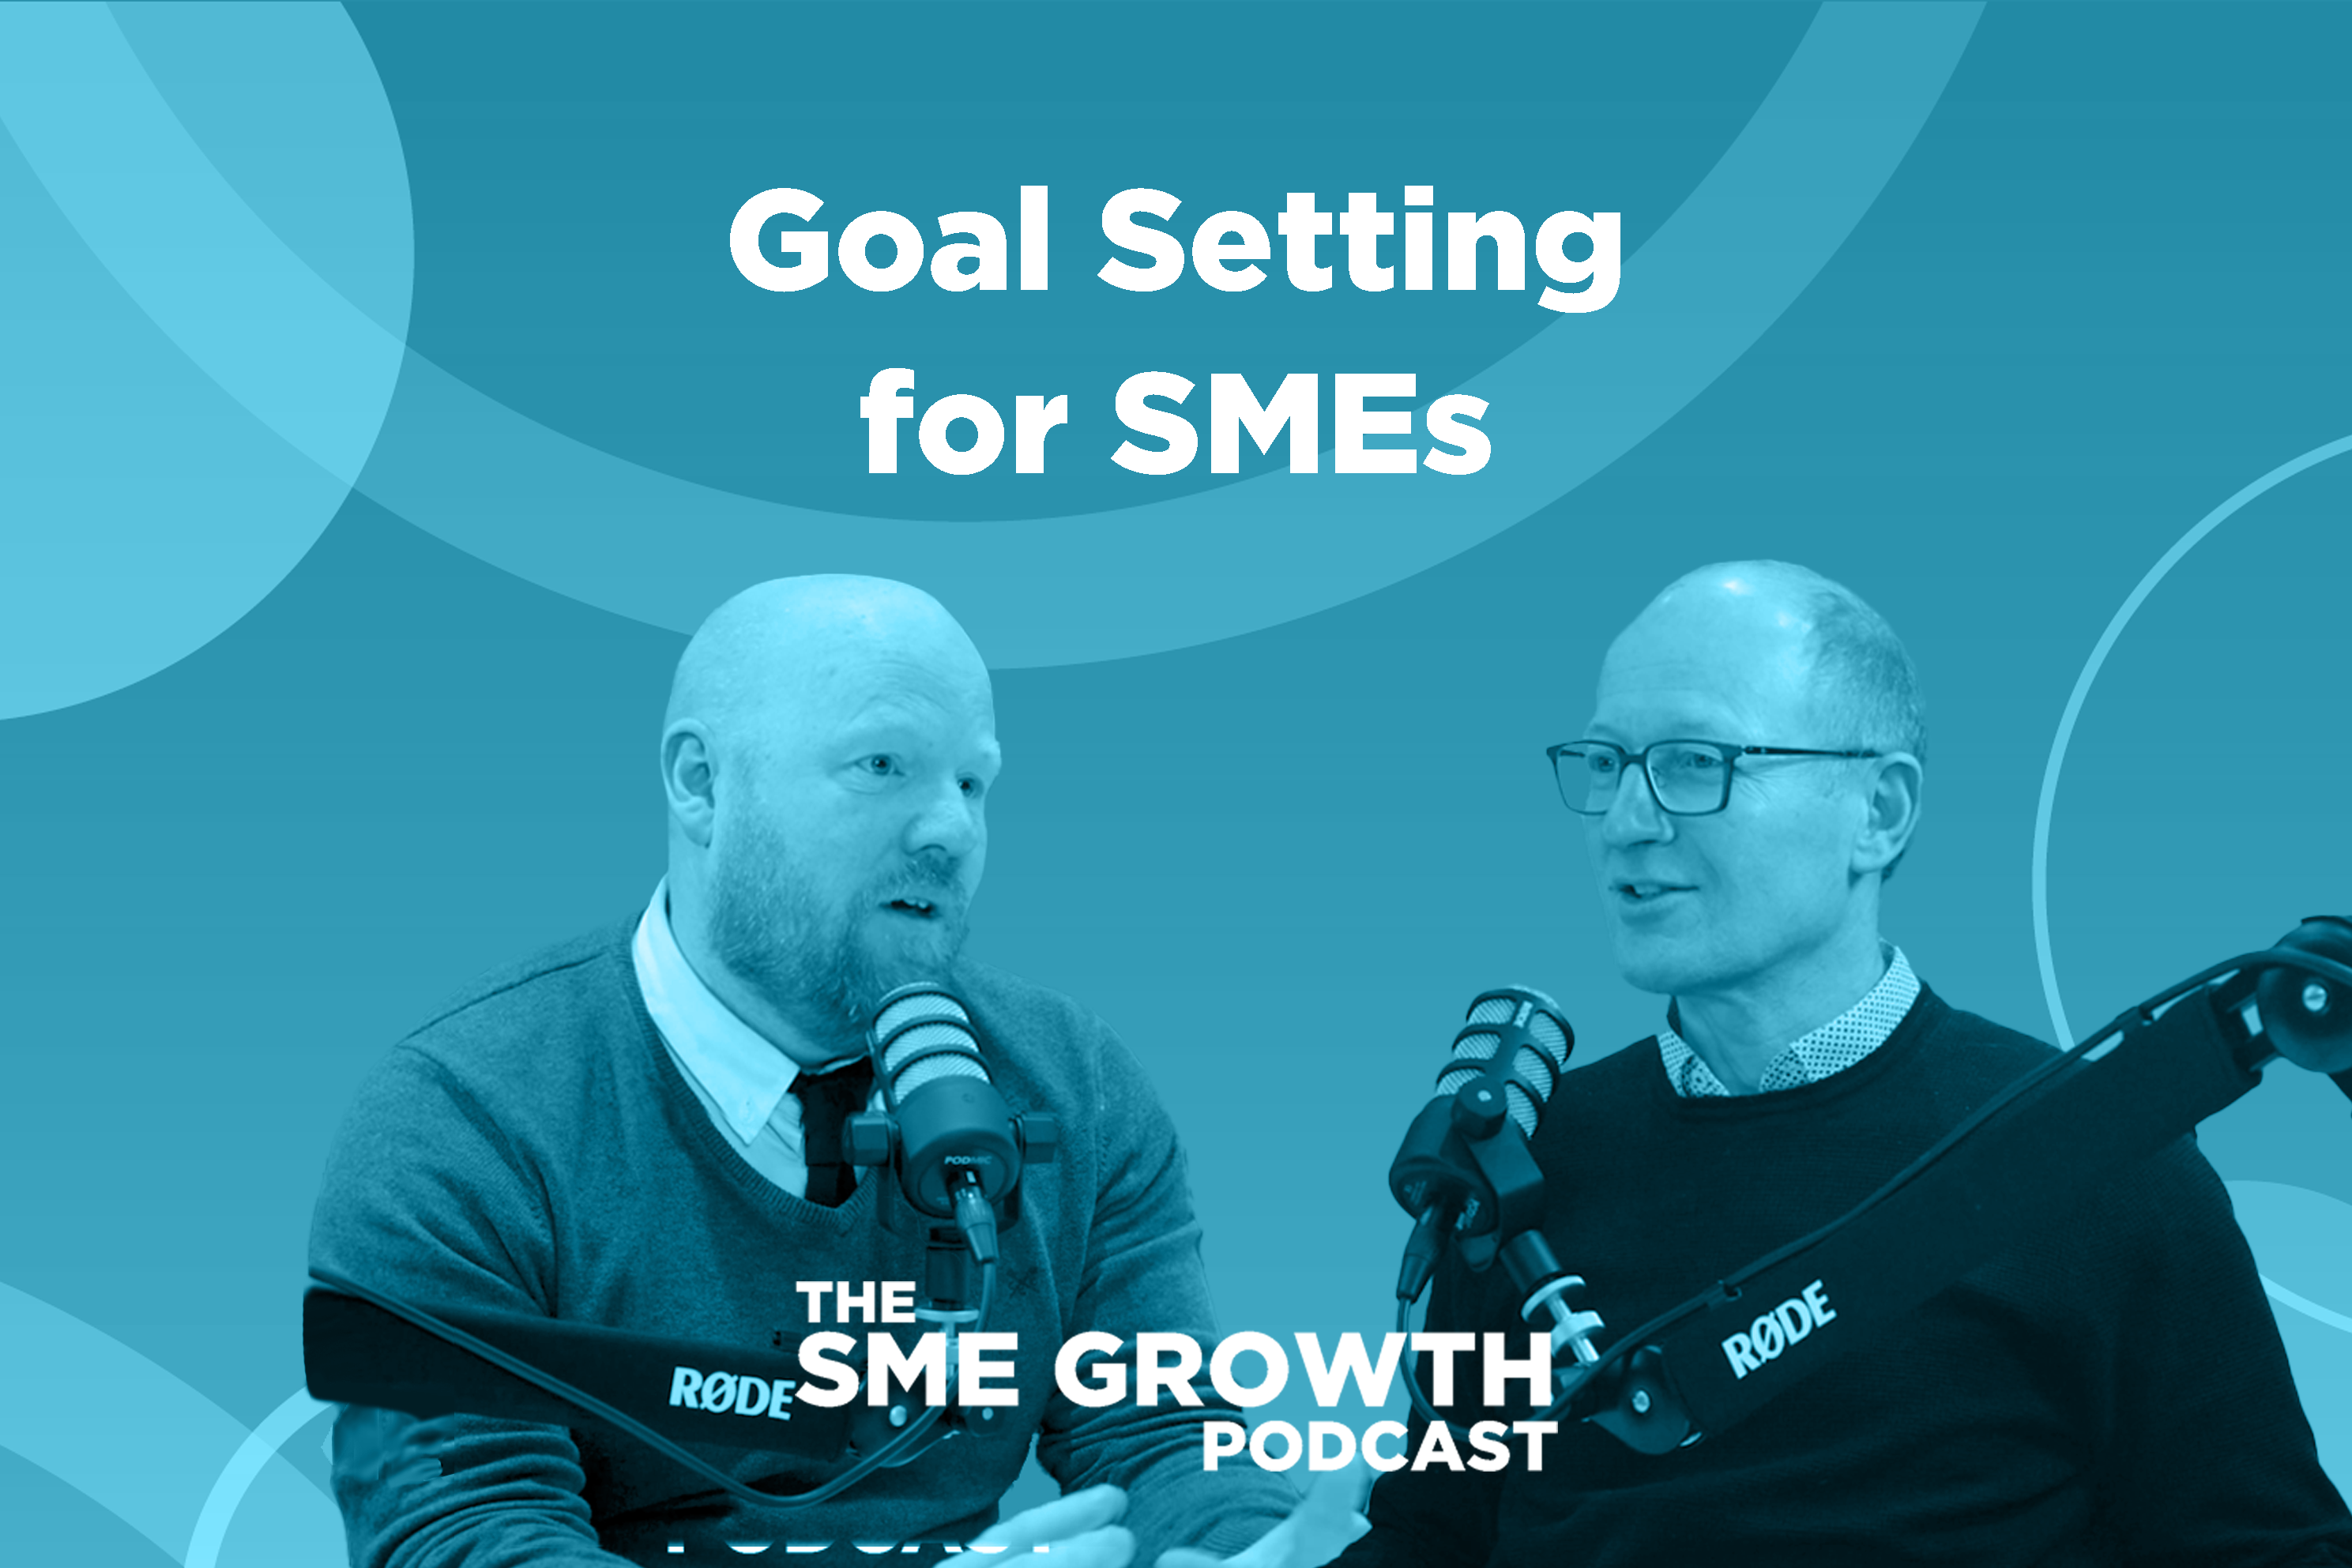 Goal settings for SMEs, The SME Growth Podacst, two males sit talking into microphones with blue overlay